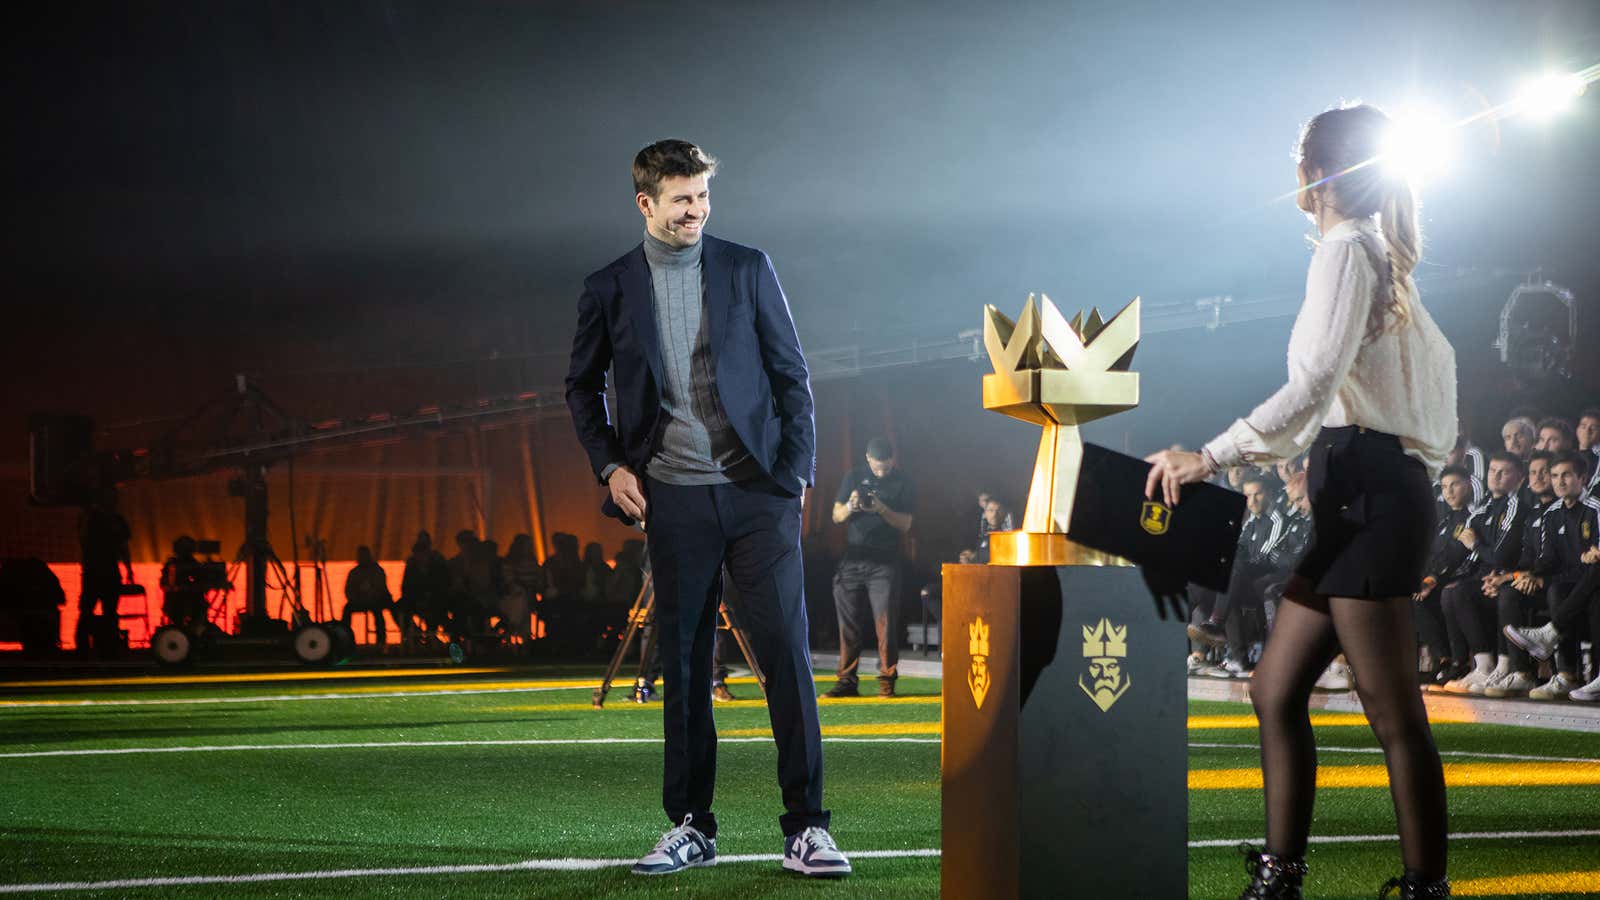 Welcome to the Kings League, Gerard Piqué’s New Soccer ‘Circus’ Going Viral on Twitch